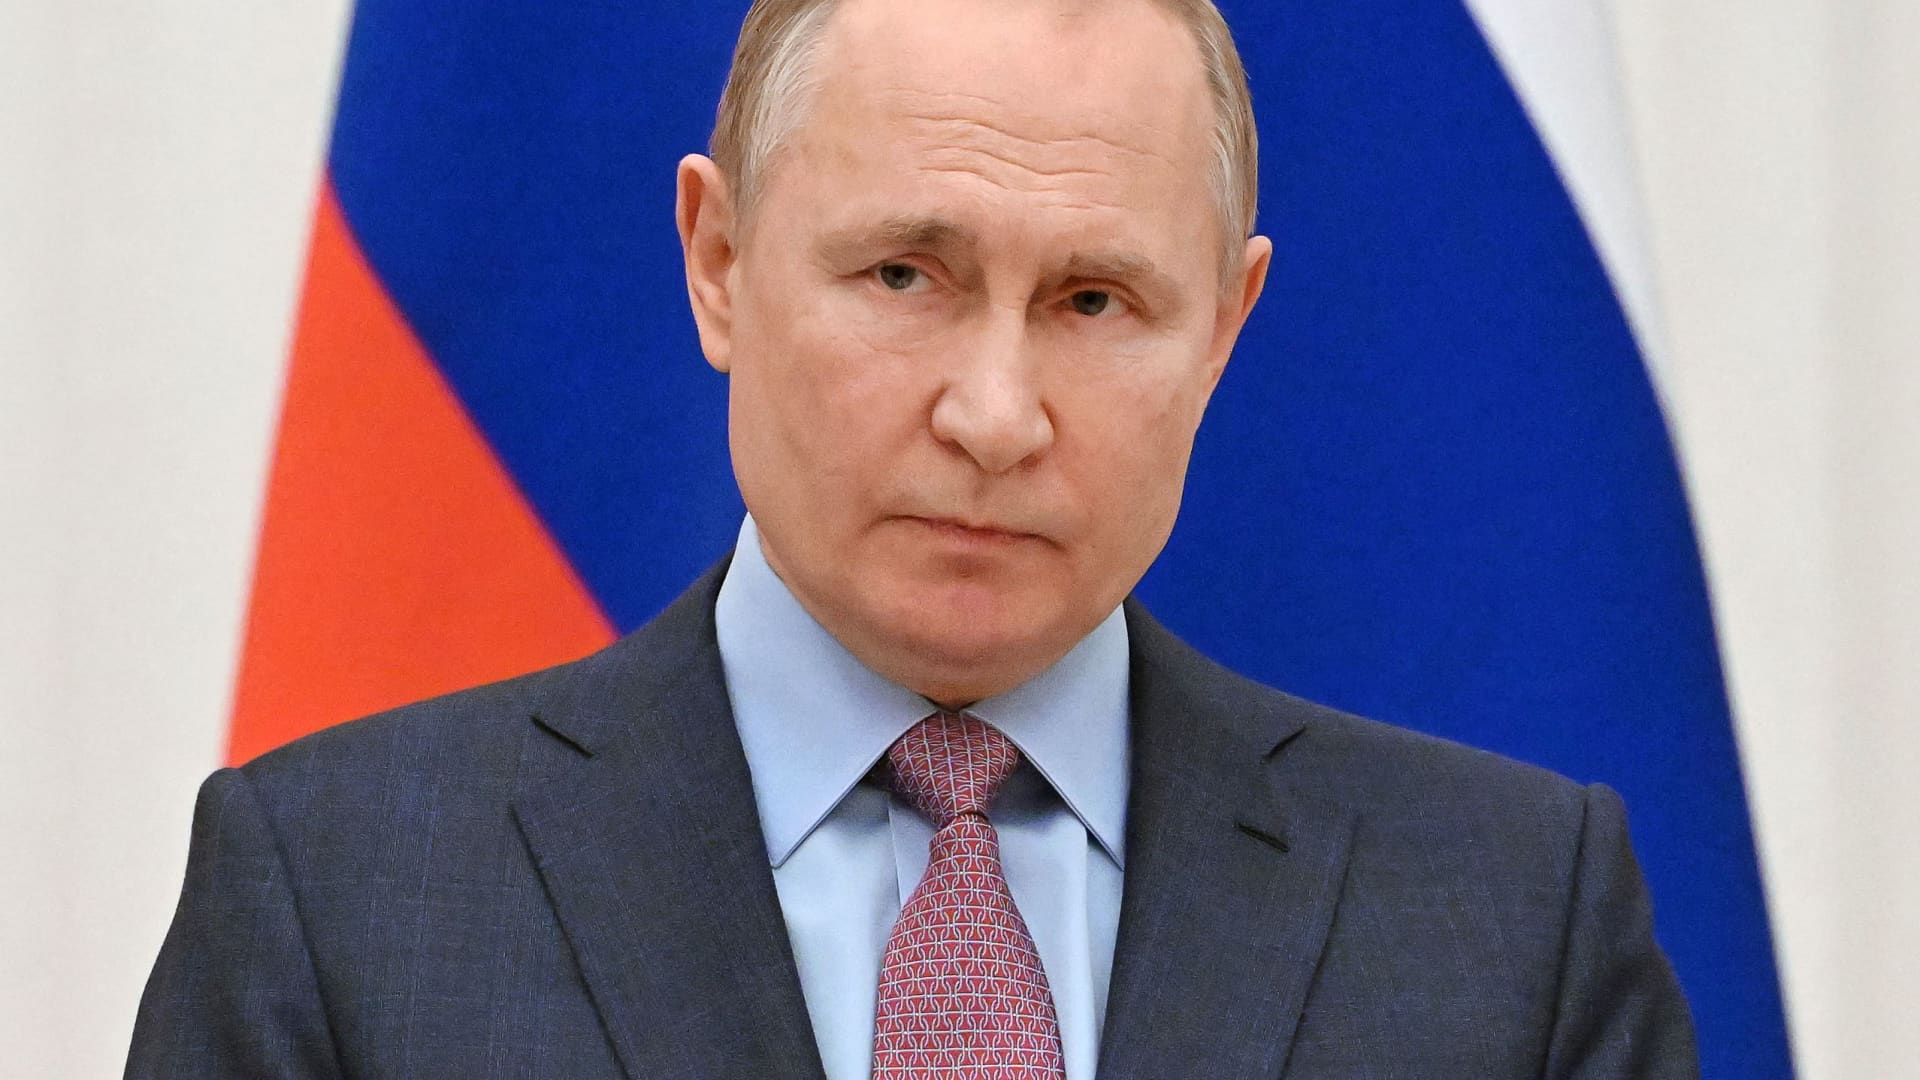 Russian President Vladimir Putin attends a joint news conference with Belarusian President Alexander Lukashenko in Moscow, Russia February 18, 2022.